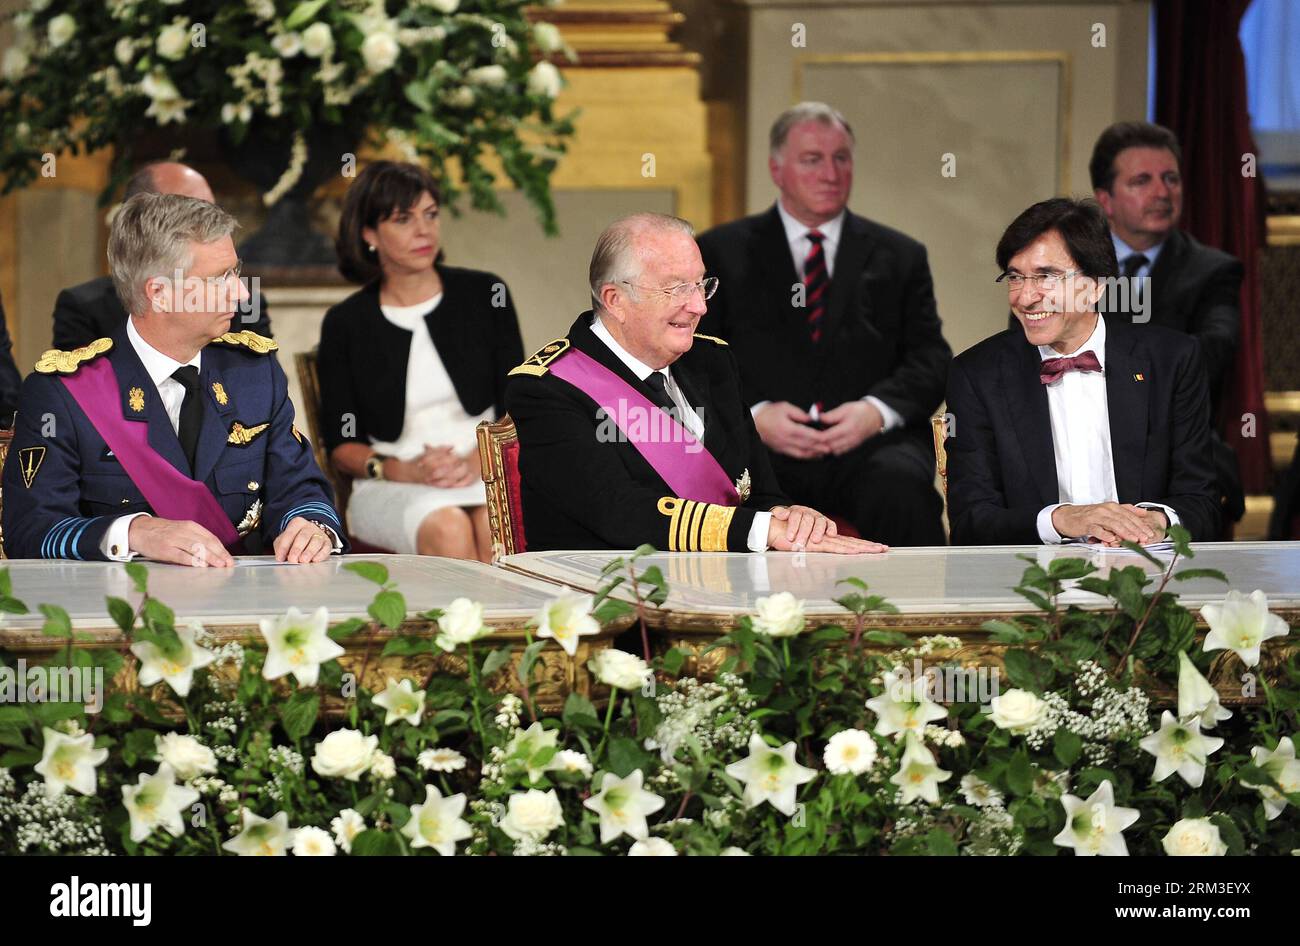 Bildnummer: 60168365  Datum: 21.07.2013  Copyright: imago/Xinhua (130721) -- BRUSSELS, July 21, 2013 (Xinhua) -- Belgium s King Albert II (C, front), Prince Philippe (L, front) and Prime Minister Elio Di Rupo (R, front) attend the abdication ceremony at the Royal Palace in Brussels, capital of Belgium, on July 21, 2013, the country s national day.   (Xinhua/Ye Pingfan)(xzj)  BELGIUM-BRUSSELS  PUBLICATIONxNOTxINxCHN People Entertainment Adel Königshaus Belgien Amtswechsel Thronfolge Abdankung Thronwechsel Brüssel xdp x1x 2013 quer premiumd o0 Familie, privat, Vater, Eltern, Kind, Sohn     60168 Stock Photo